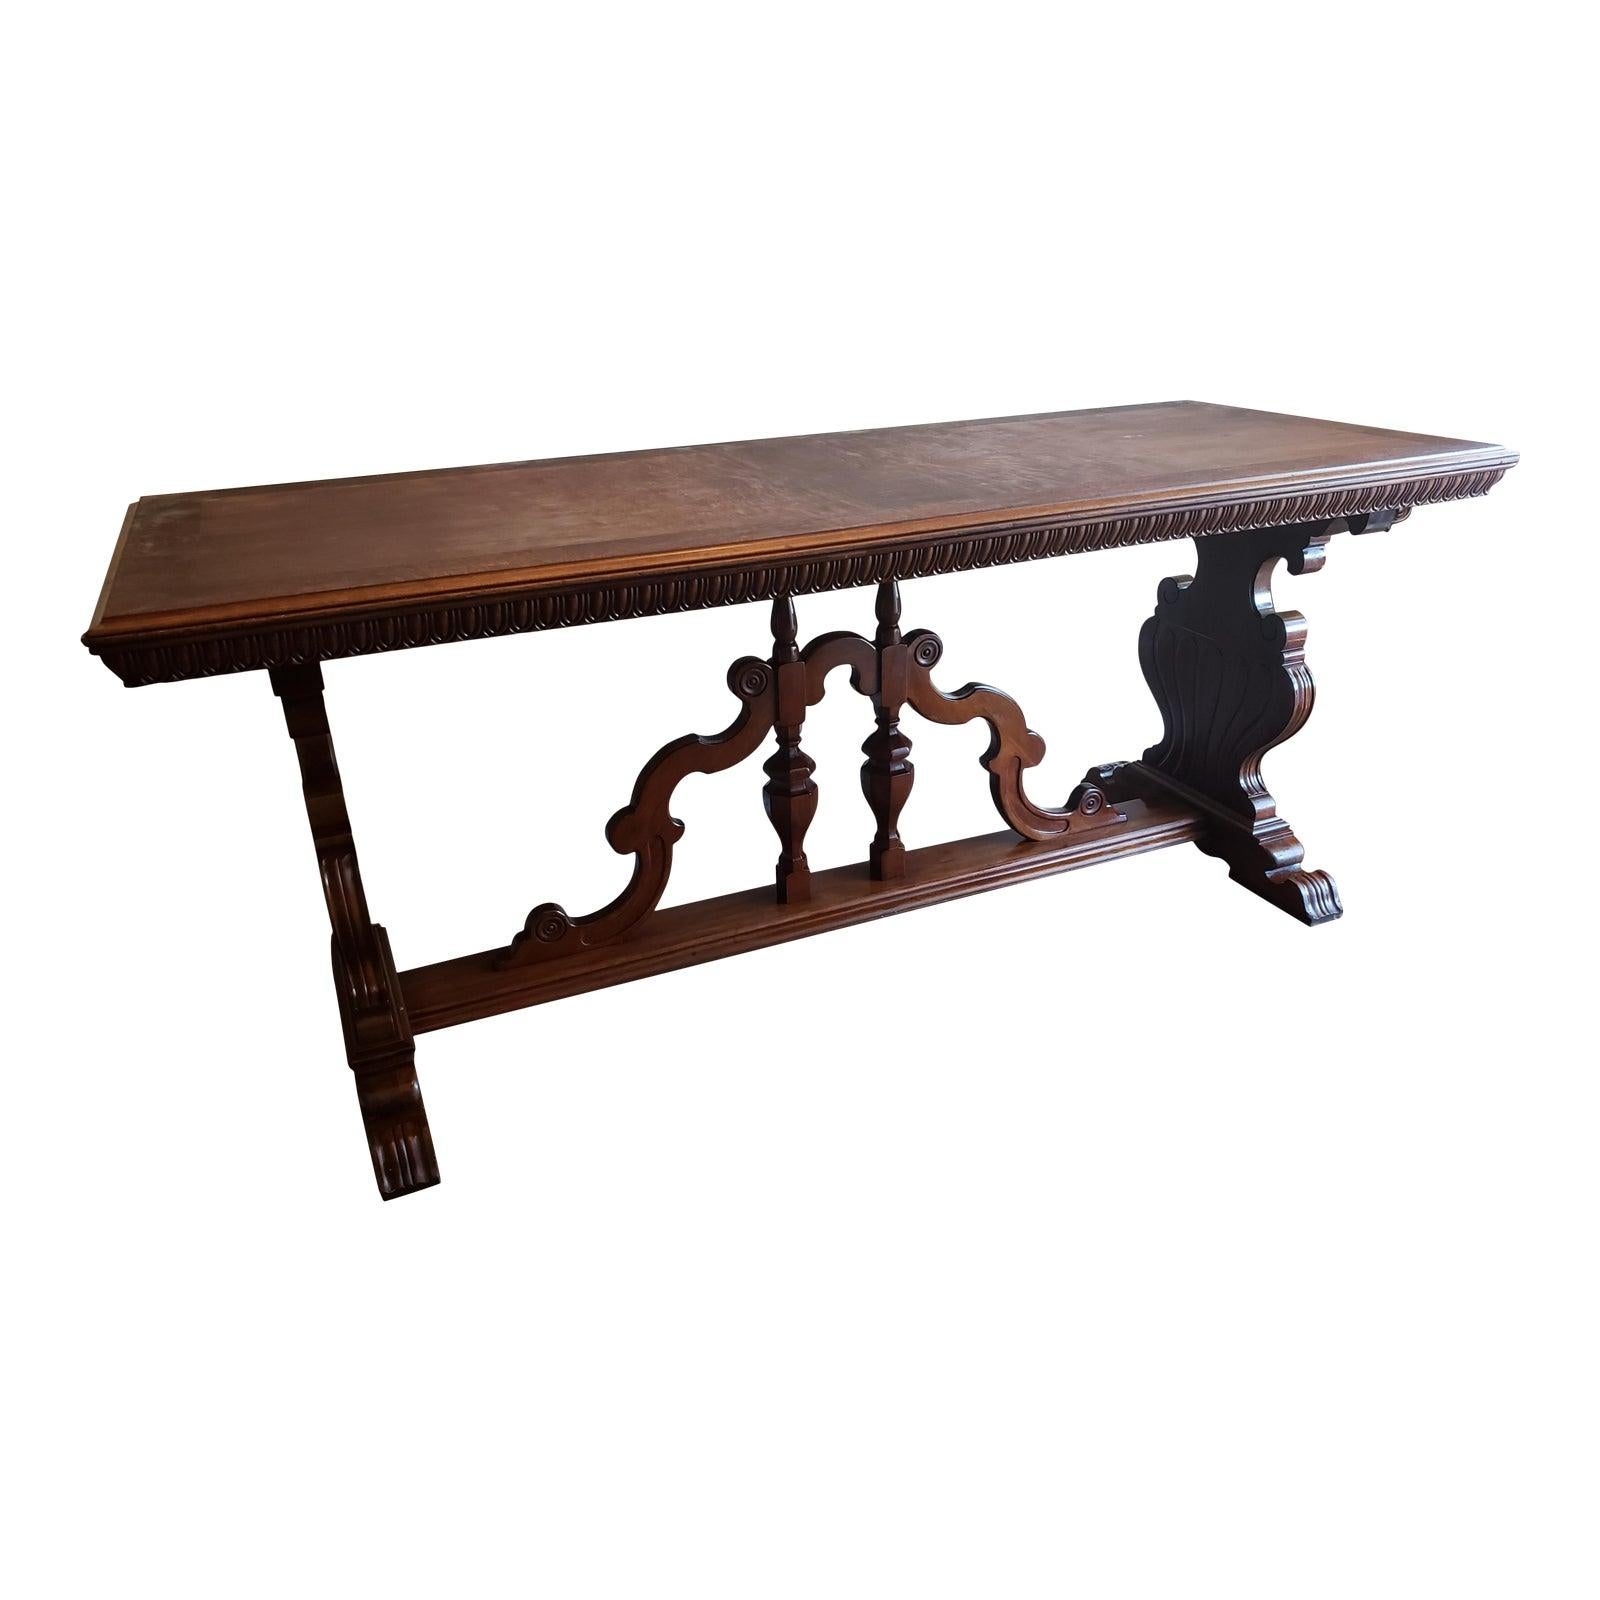 1910s Imperial Grand Rapids Carved Solid Walnut Trestle Table